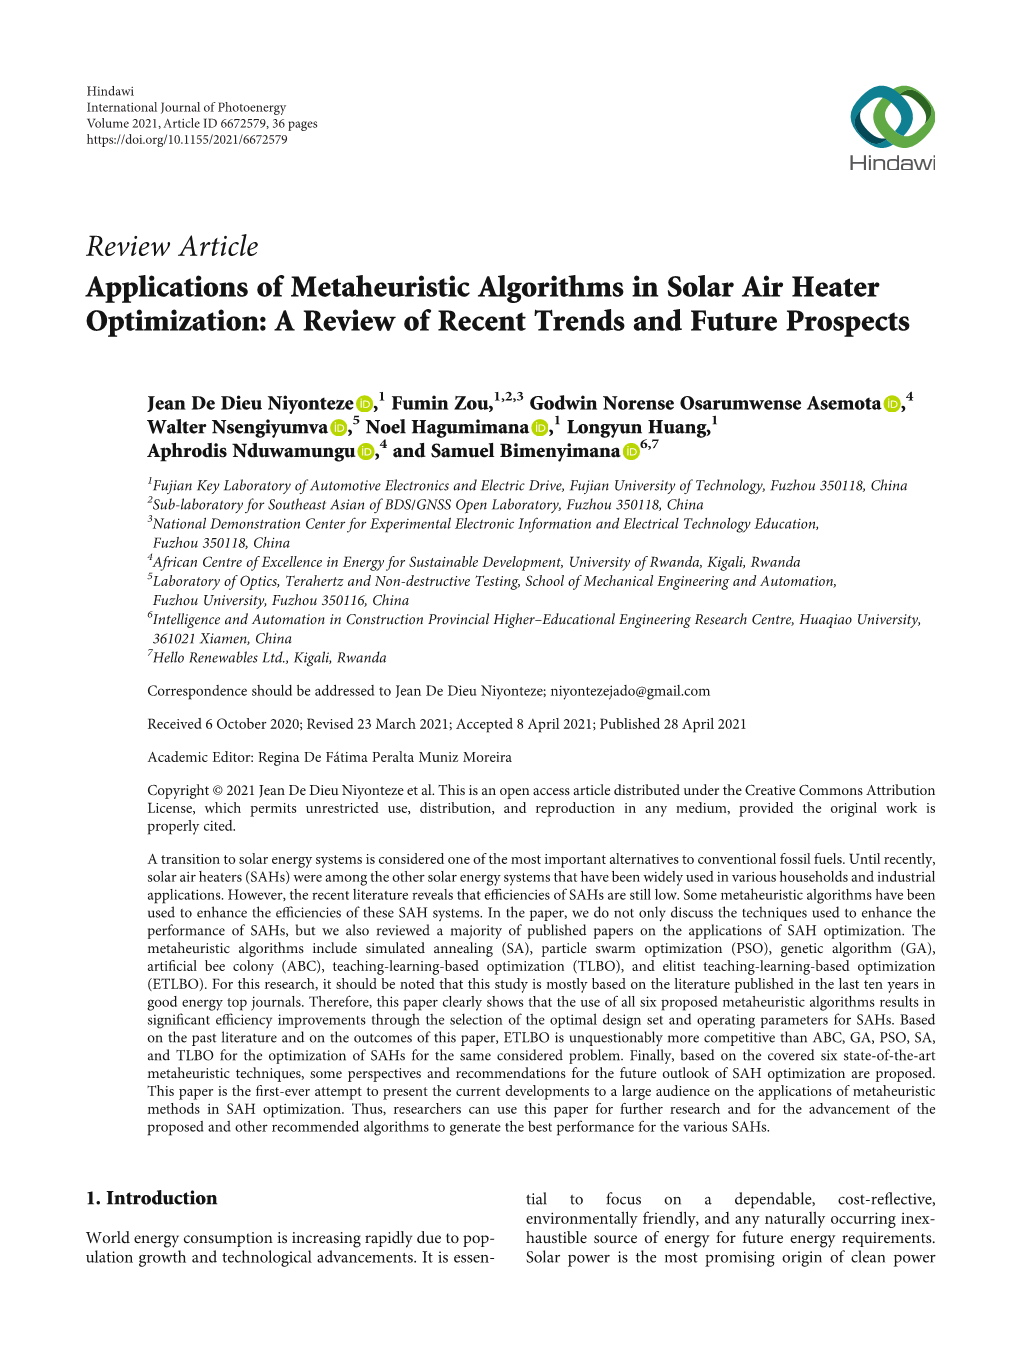 Applications of Metaheuristic Algorithms in Solar Air Heater Optimization: a Review of Recent Trends and Future Prospects